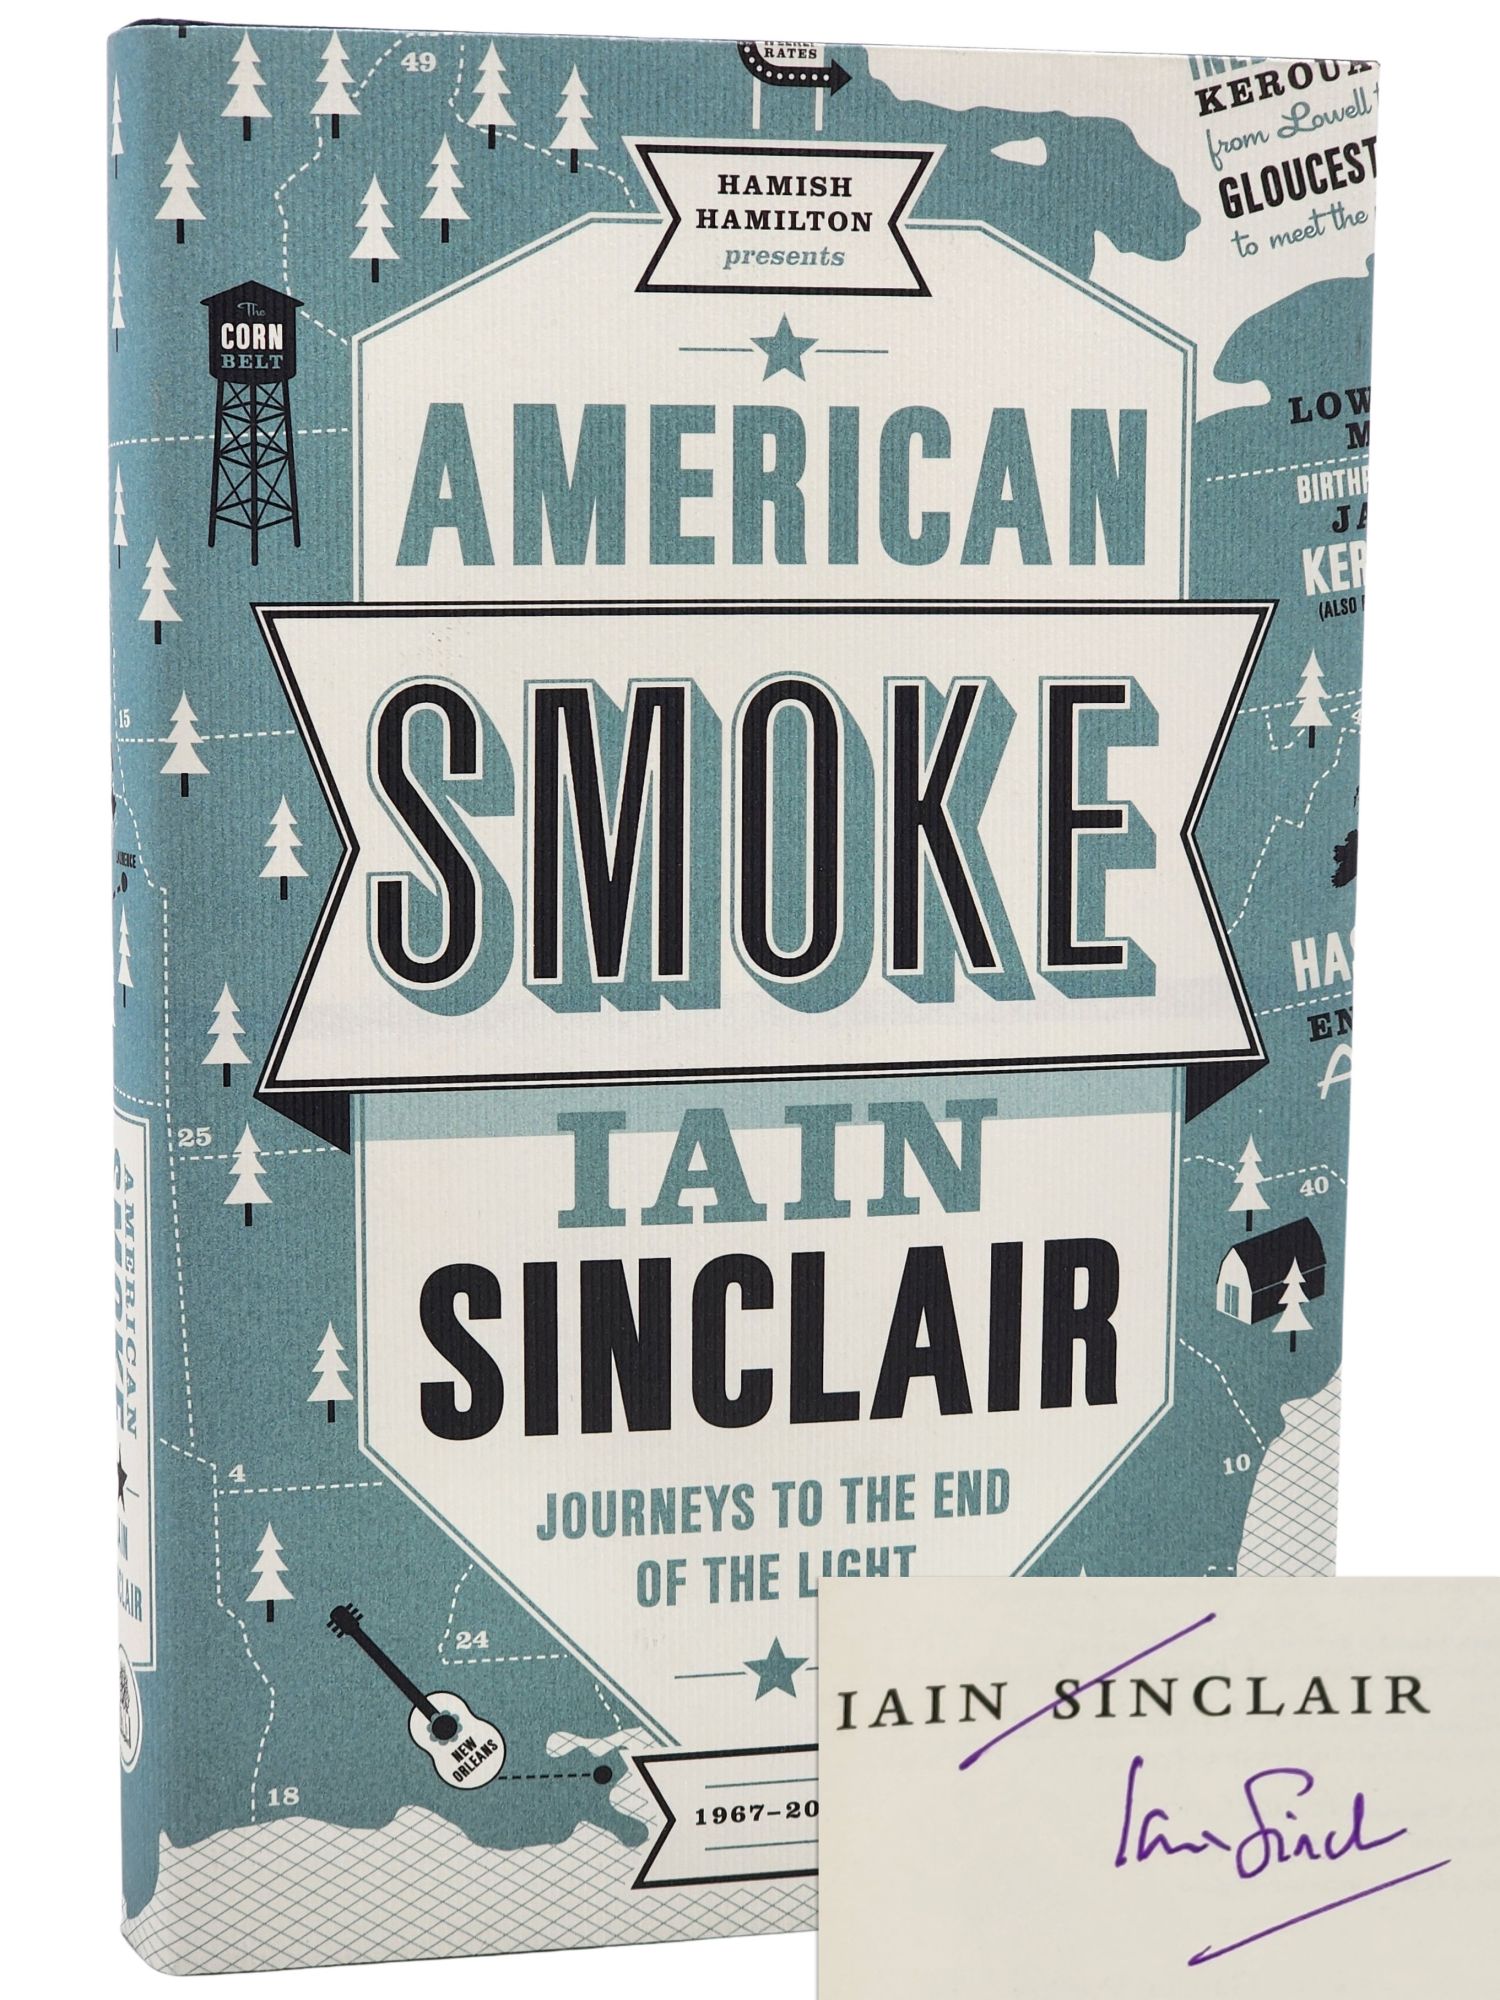 [Book #27223] AMERICAN SMOKE. Journeys To the End of the Light. Iain Sinclair.